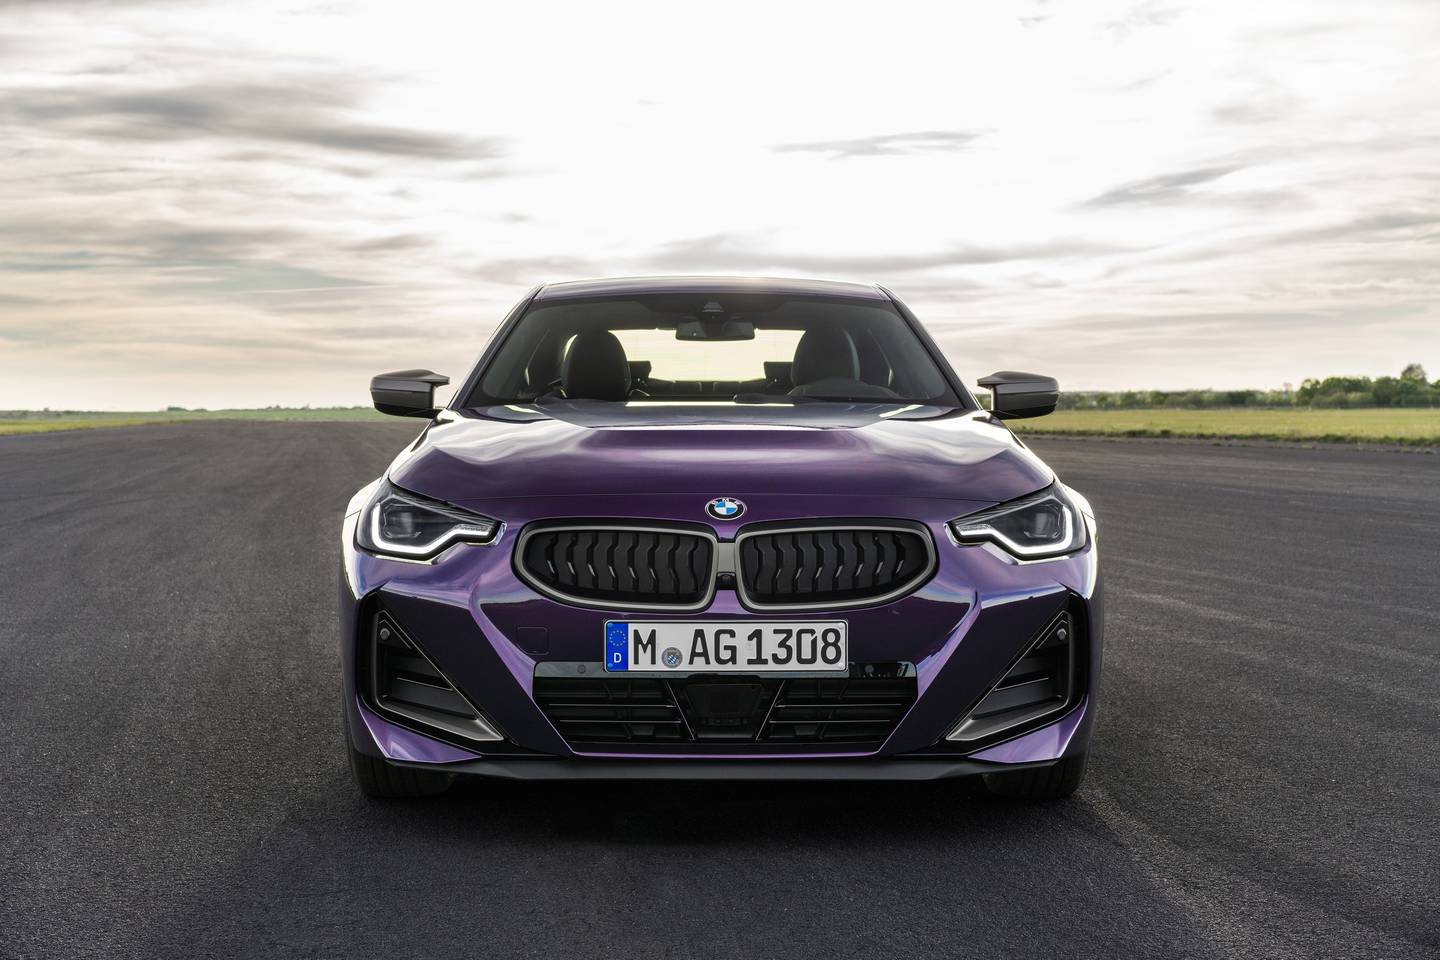 Departing from BMW's oversize grilles, the newcomer has a minuscule pair of nostrils, flanked by slit-like eyes.